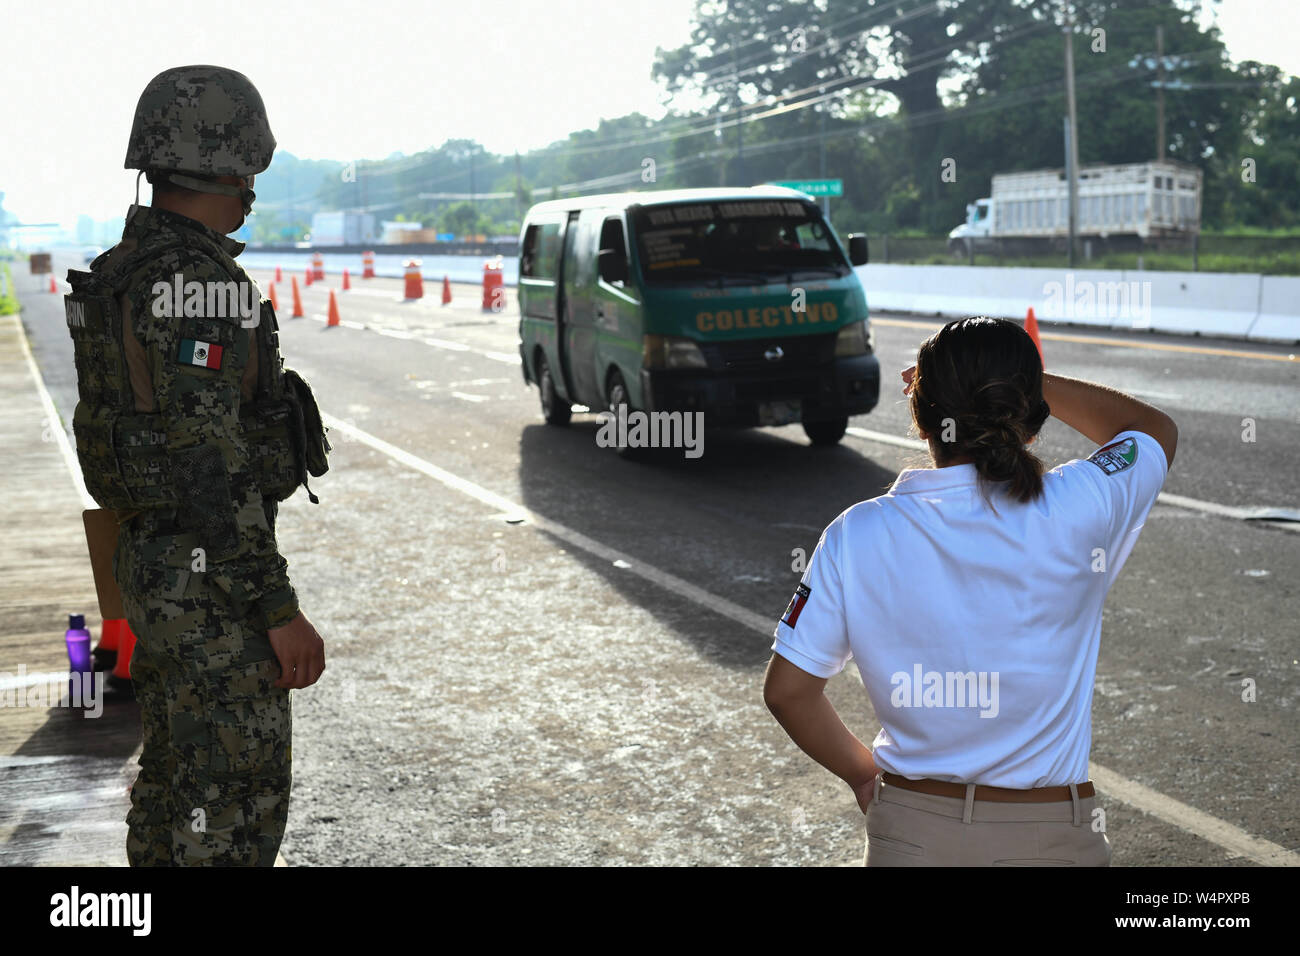 July 24, 2019, Tapachula, Chiapas, Mexico: Mexican marines and immigration officers check IDs of commuters arriving into Tapachula city on Wednesday. Hundreds of illegal arrivals still happen every day as the flow of migrants has moved to isolated spots along the Suchiate River, which marks the border between the two nations. Mexican President Lopez Obrador's administration claims to have reduced the flow of migrants looking to reach America, but much of the flow continues in remote border areas. Credit: Miguel Juarez Lugo/ZUMA Wire/Alamy Live News Stock Photo